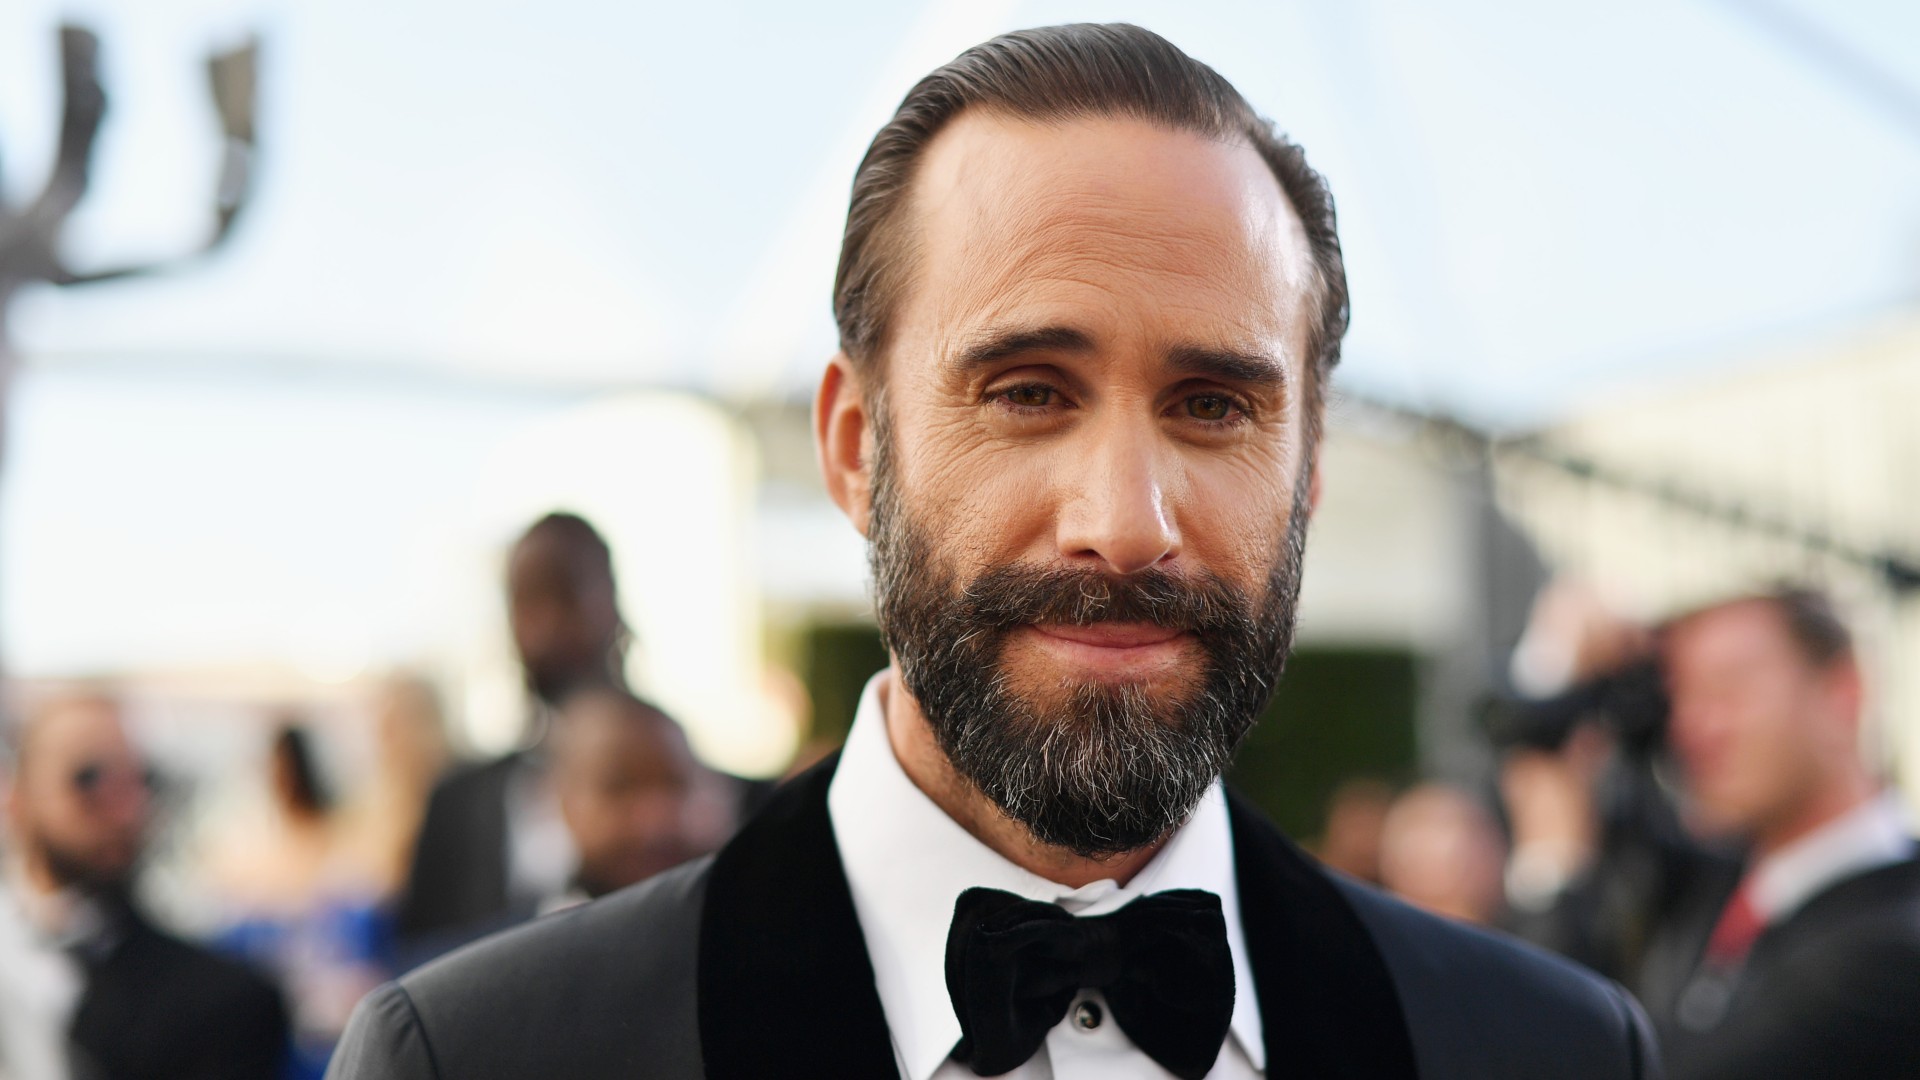 Casting News: Joseph Fiennes to Play Extreme Athlete Wim Hof in 'The Iceman' Movie